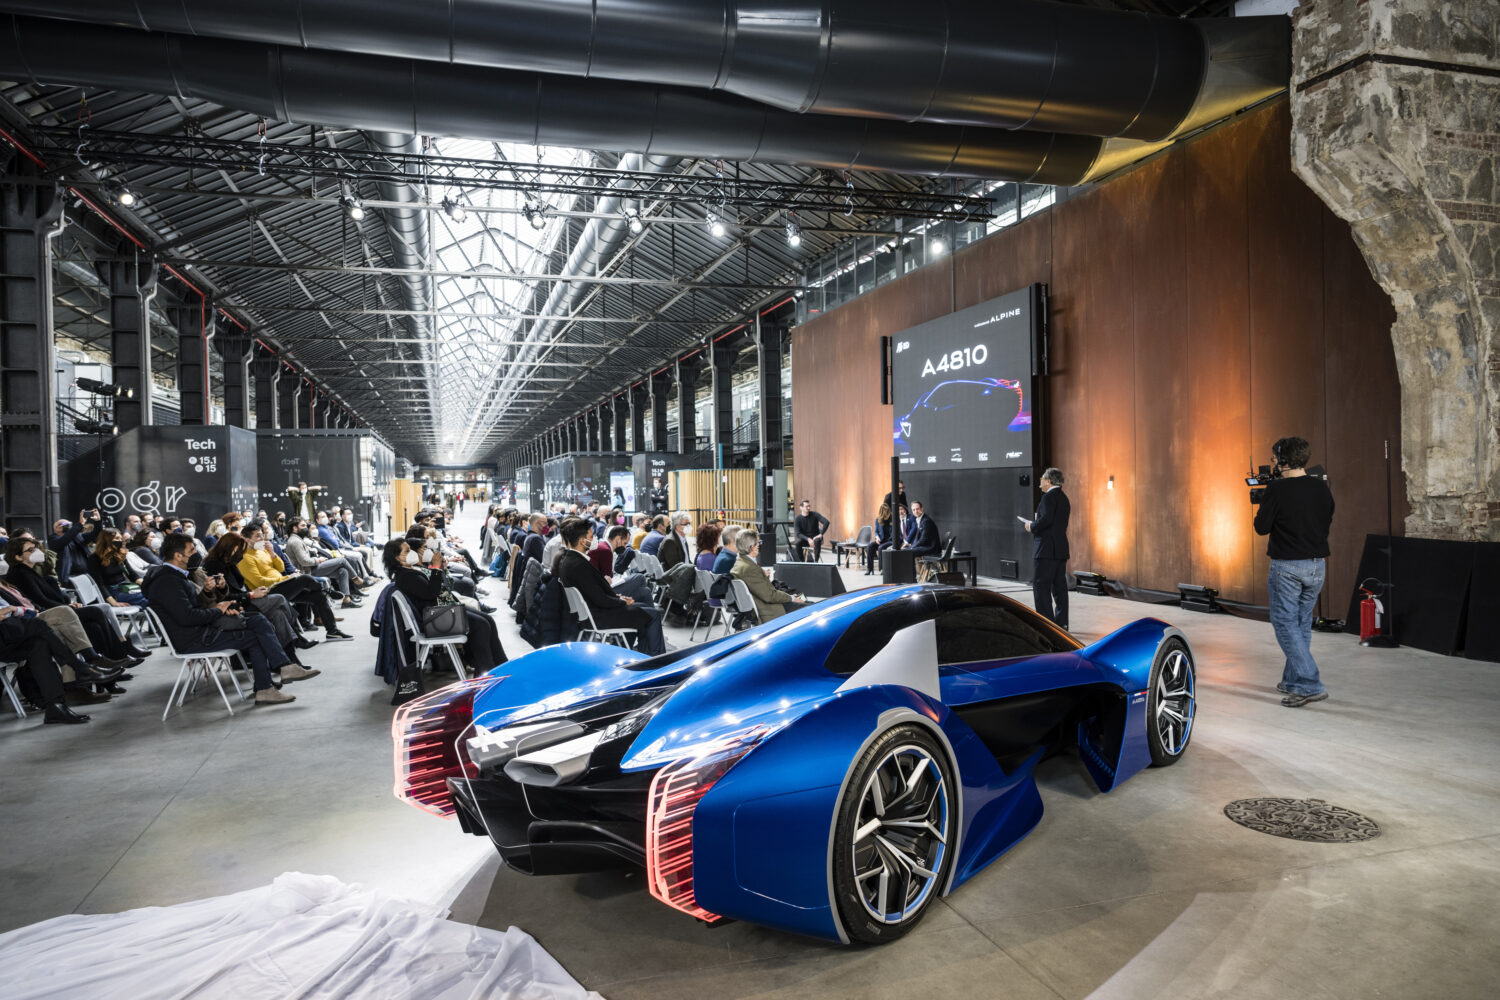 2022 - Story Alpine and IED Turin: a win-win partnership that is more than a concept-car